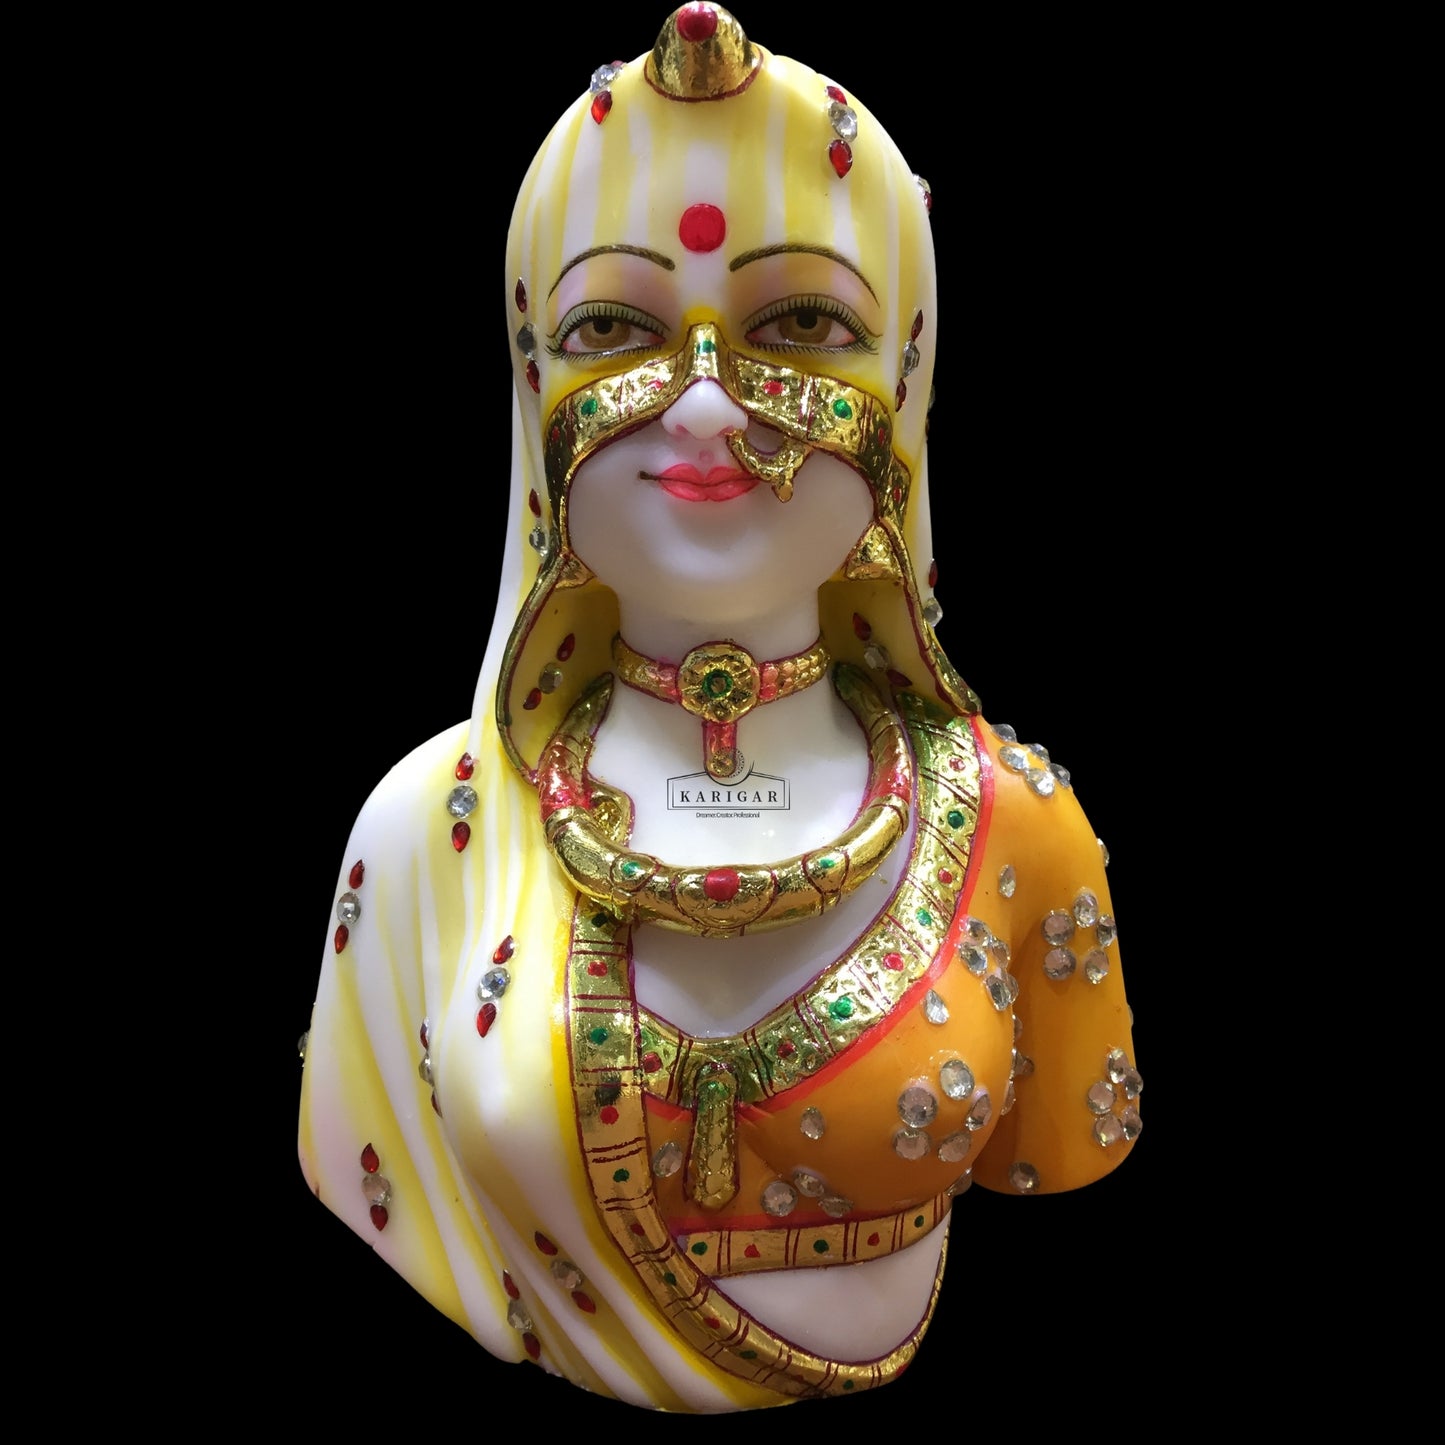 Bani Thani Bust Statue, Large 9 inches Murti, The Indian Mona Lisa Bust Marble Sculpture, Traditional Indian Women Figurine Bust, Multicolor Jewelry Clothes Figurine - Home Office Decor Gifts (Orange)